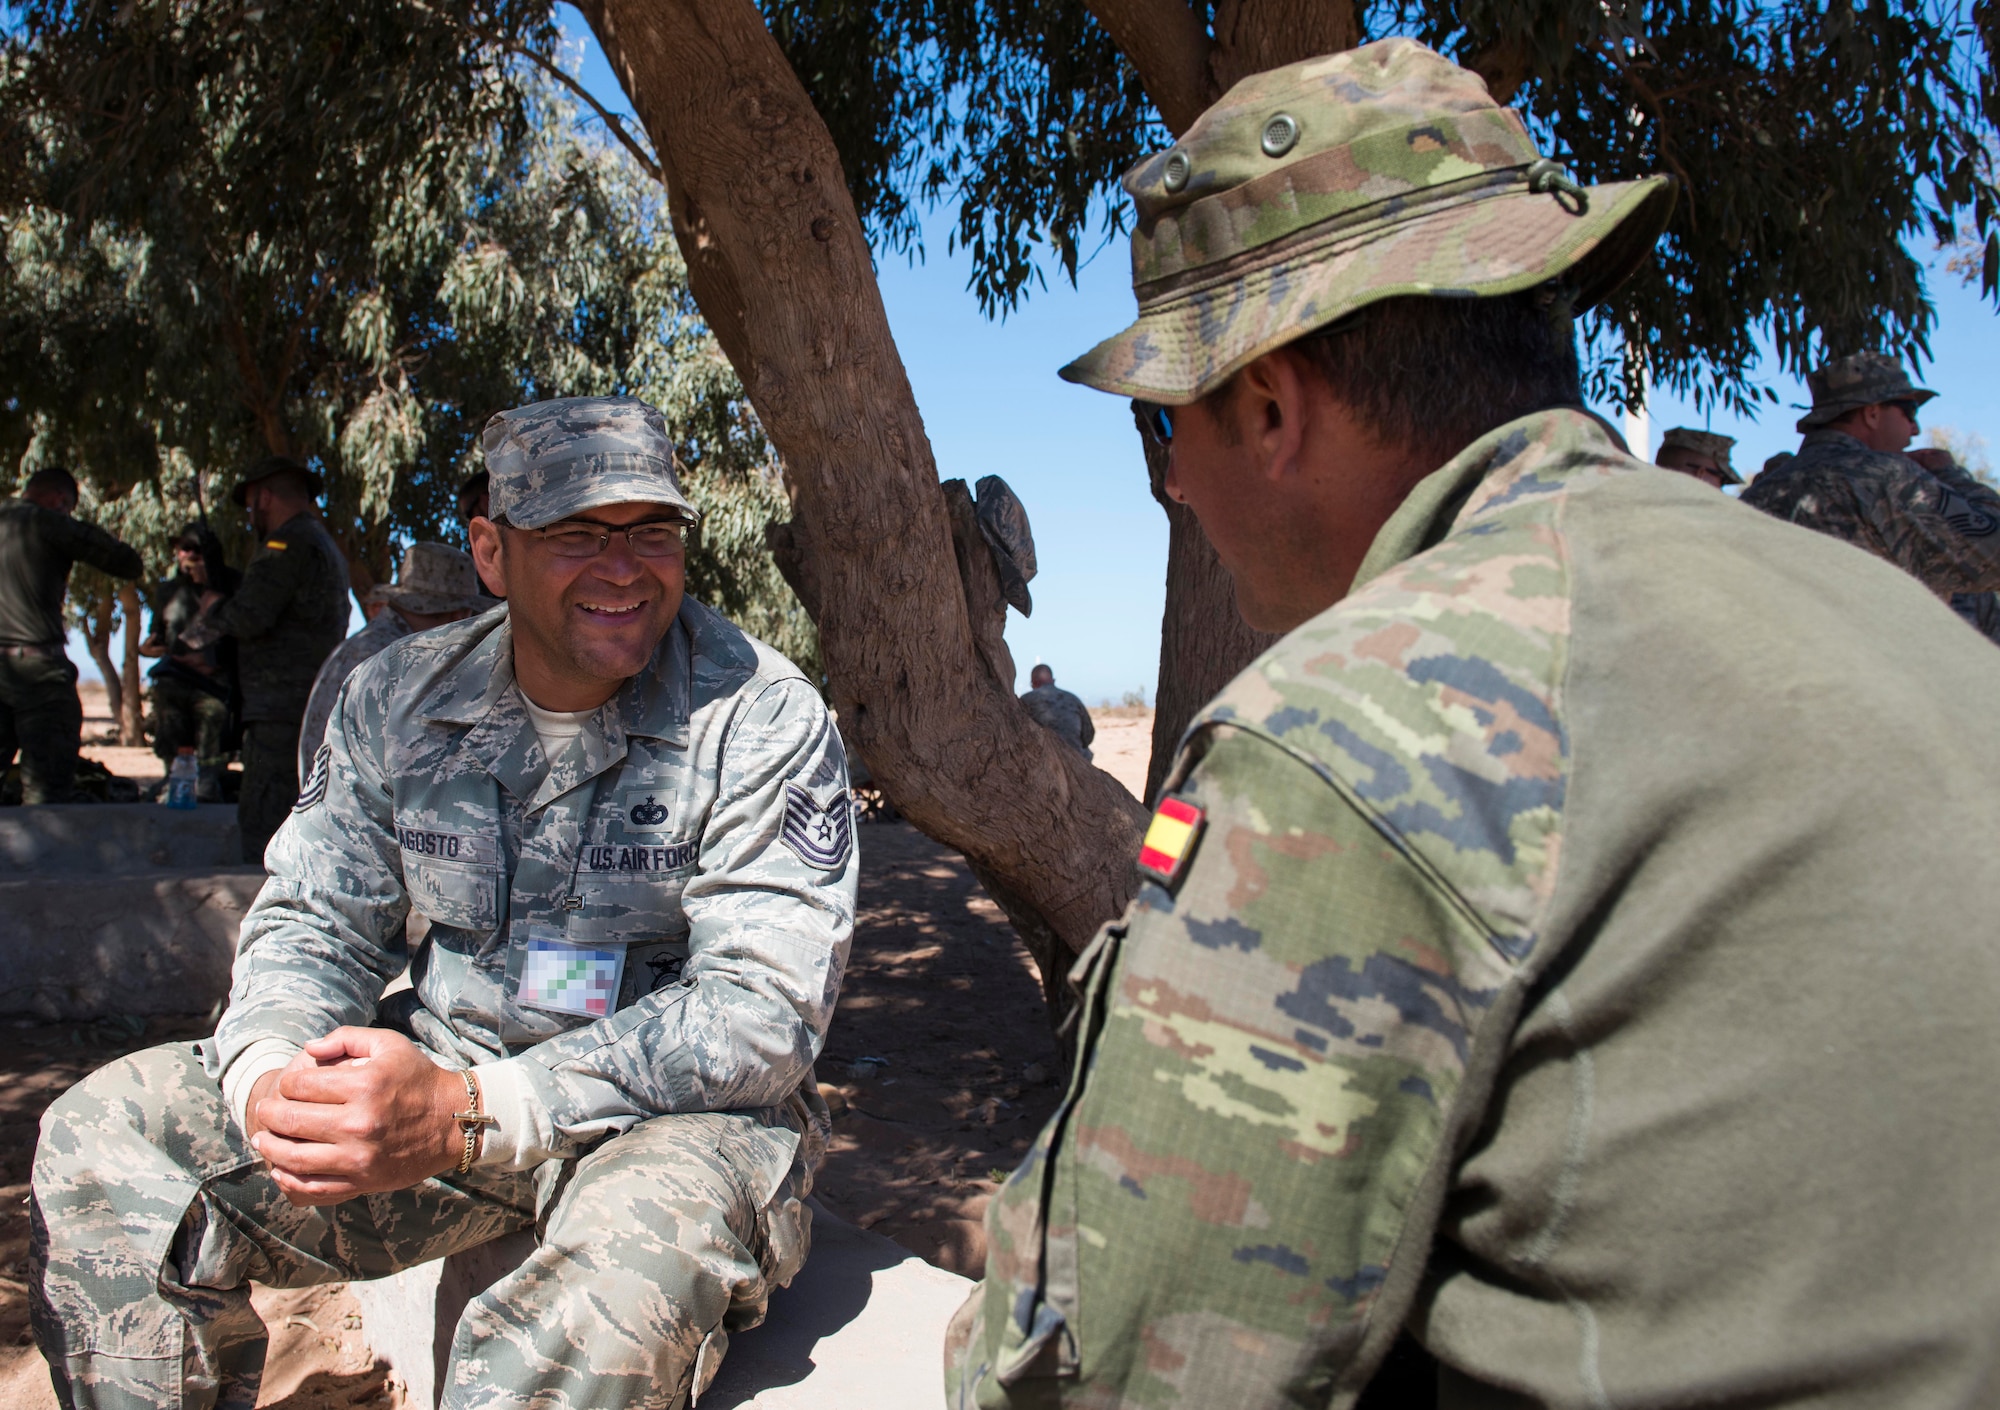 U.S. Air Force Tech. Sgt. Richard Agosto, 920th Security Forces Squadron security forces member, speaks with a Spanish Legion soldier during AFRICAN LION 16 at Tifnit, Kingdom of Morocco, April 22, 2016. The U.S. Marine Forces Europe-Africa and Kingdom of Morocco-led joint, combined exercise brought together 11 different countries to participate in a Combined Joint Task Force command post exercise and a peace support operations field training to improve interoperability between countries. (U.S. Air Force photo by Senior Airman Krystal Ardrey/Released)